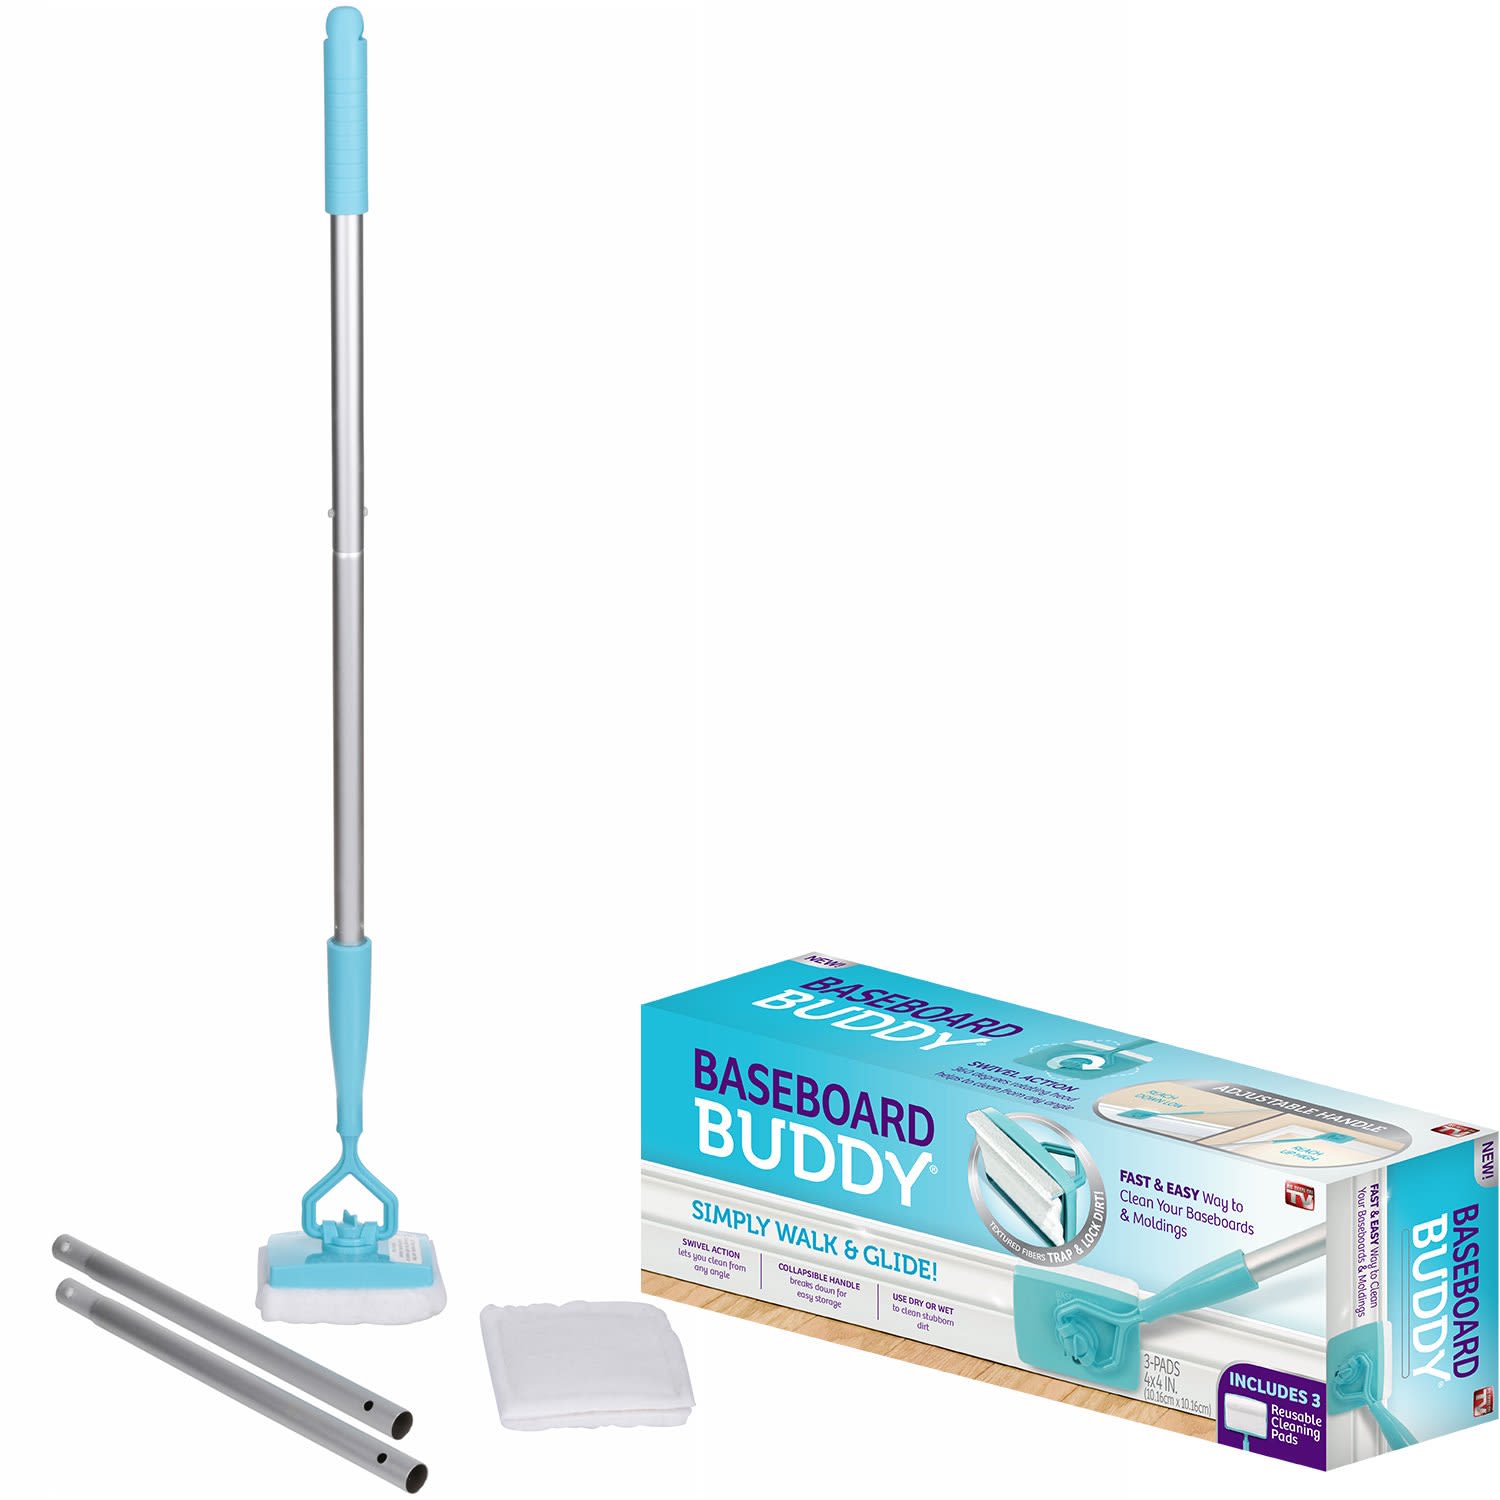 Baseboard Buddy Reviews: Why People Love This Cleaning Tool